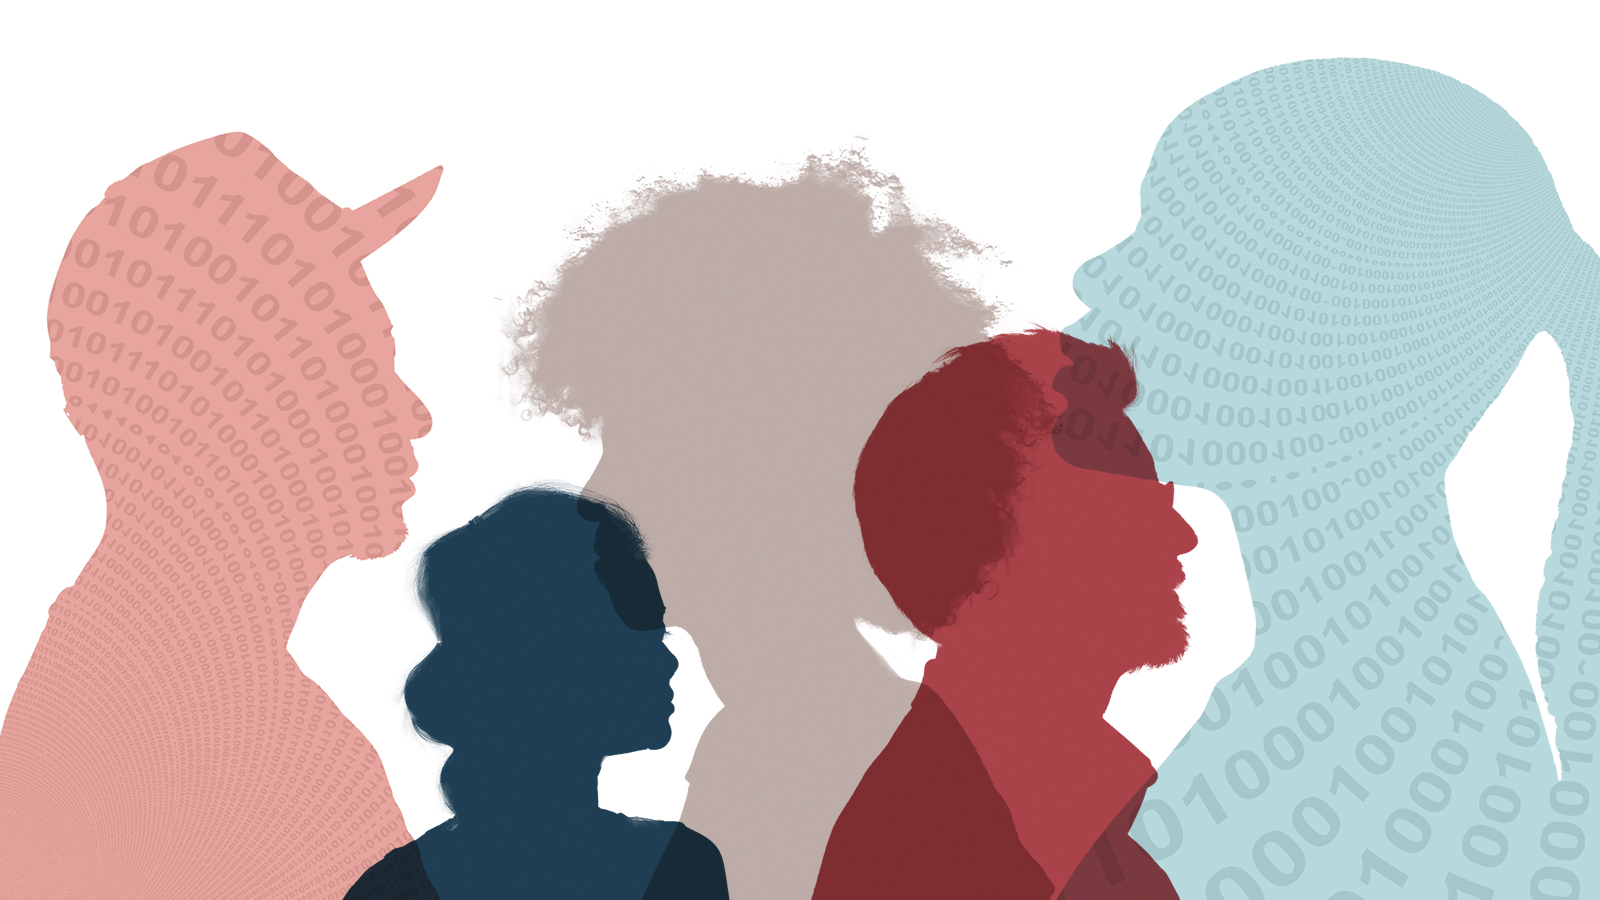 Five silhouettes of people in varying colors with binary code